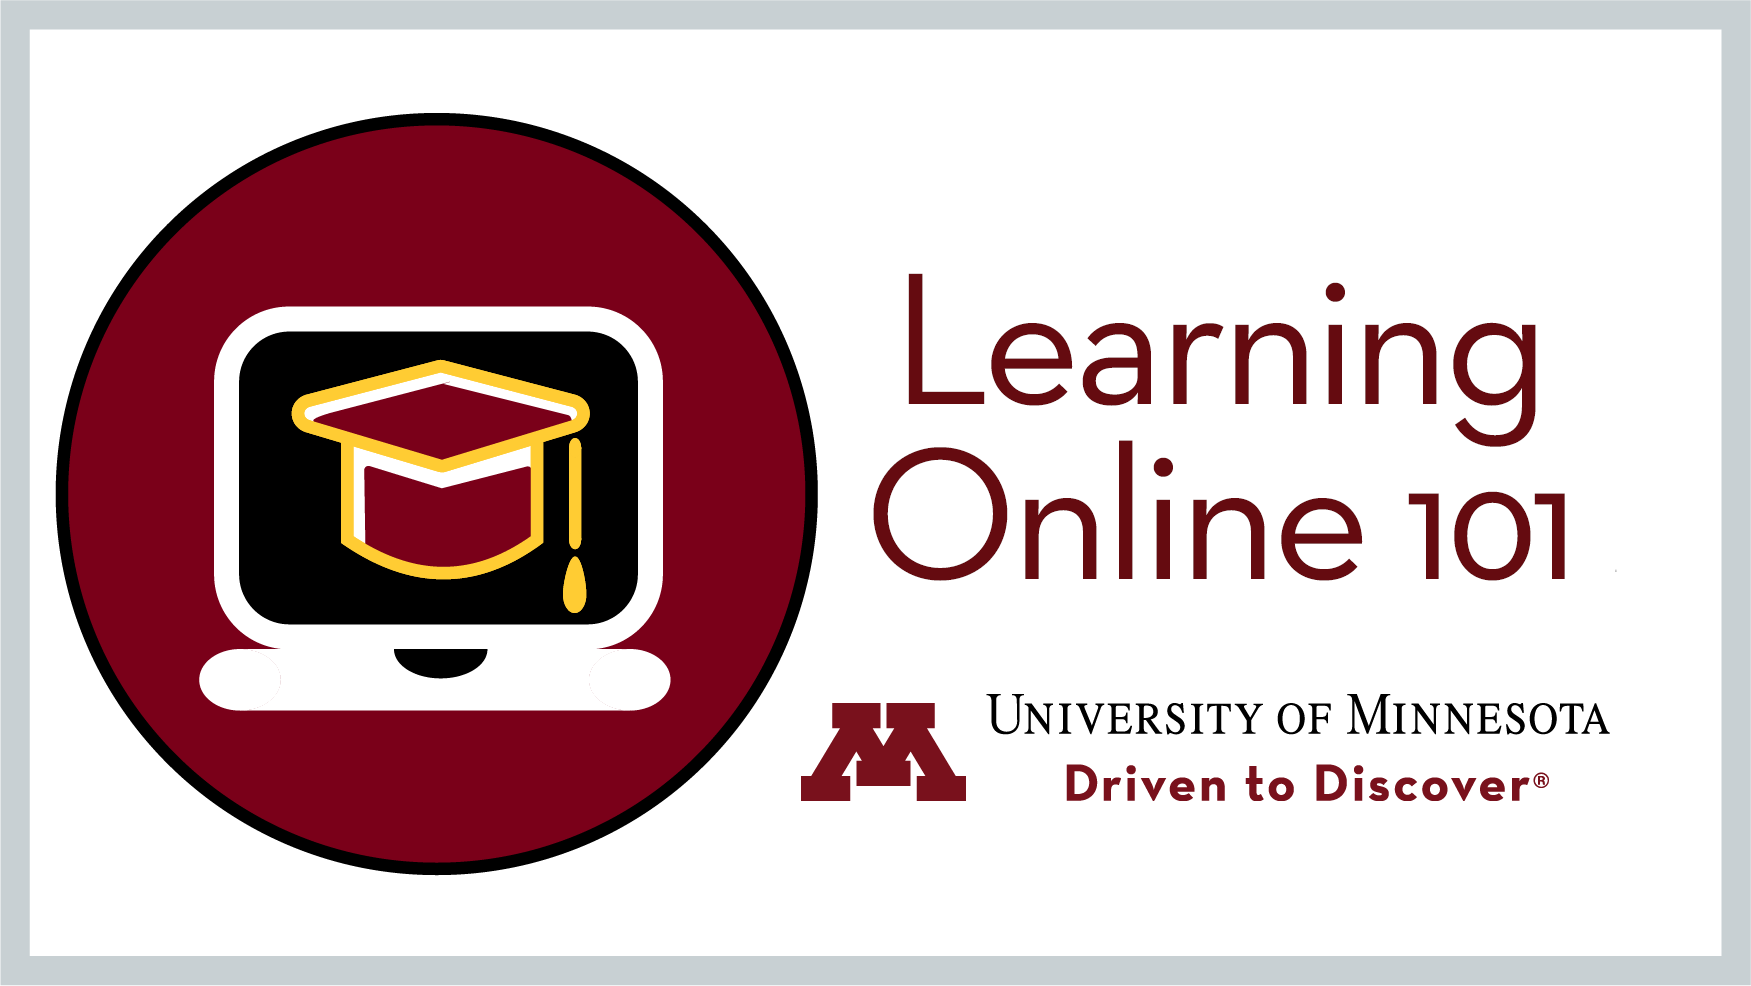 mortarboard displayed on an icon of a laptop next to text Learning Online 101